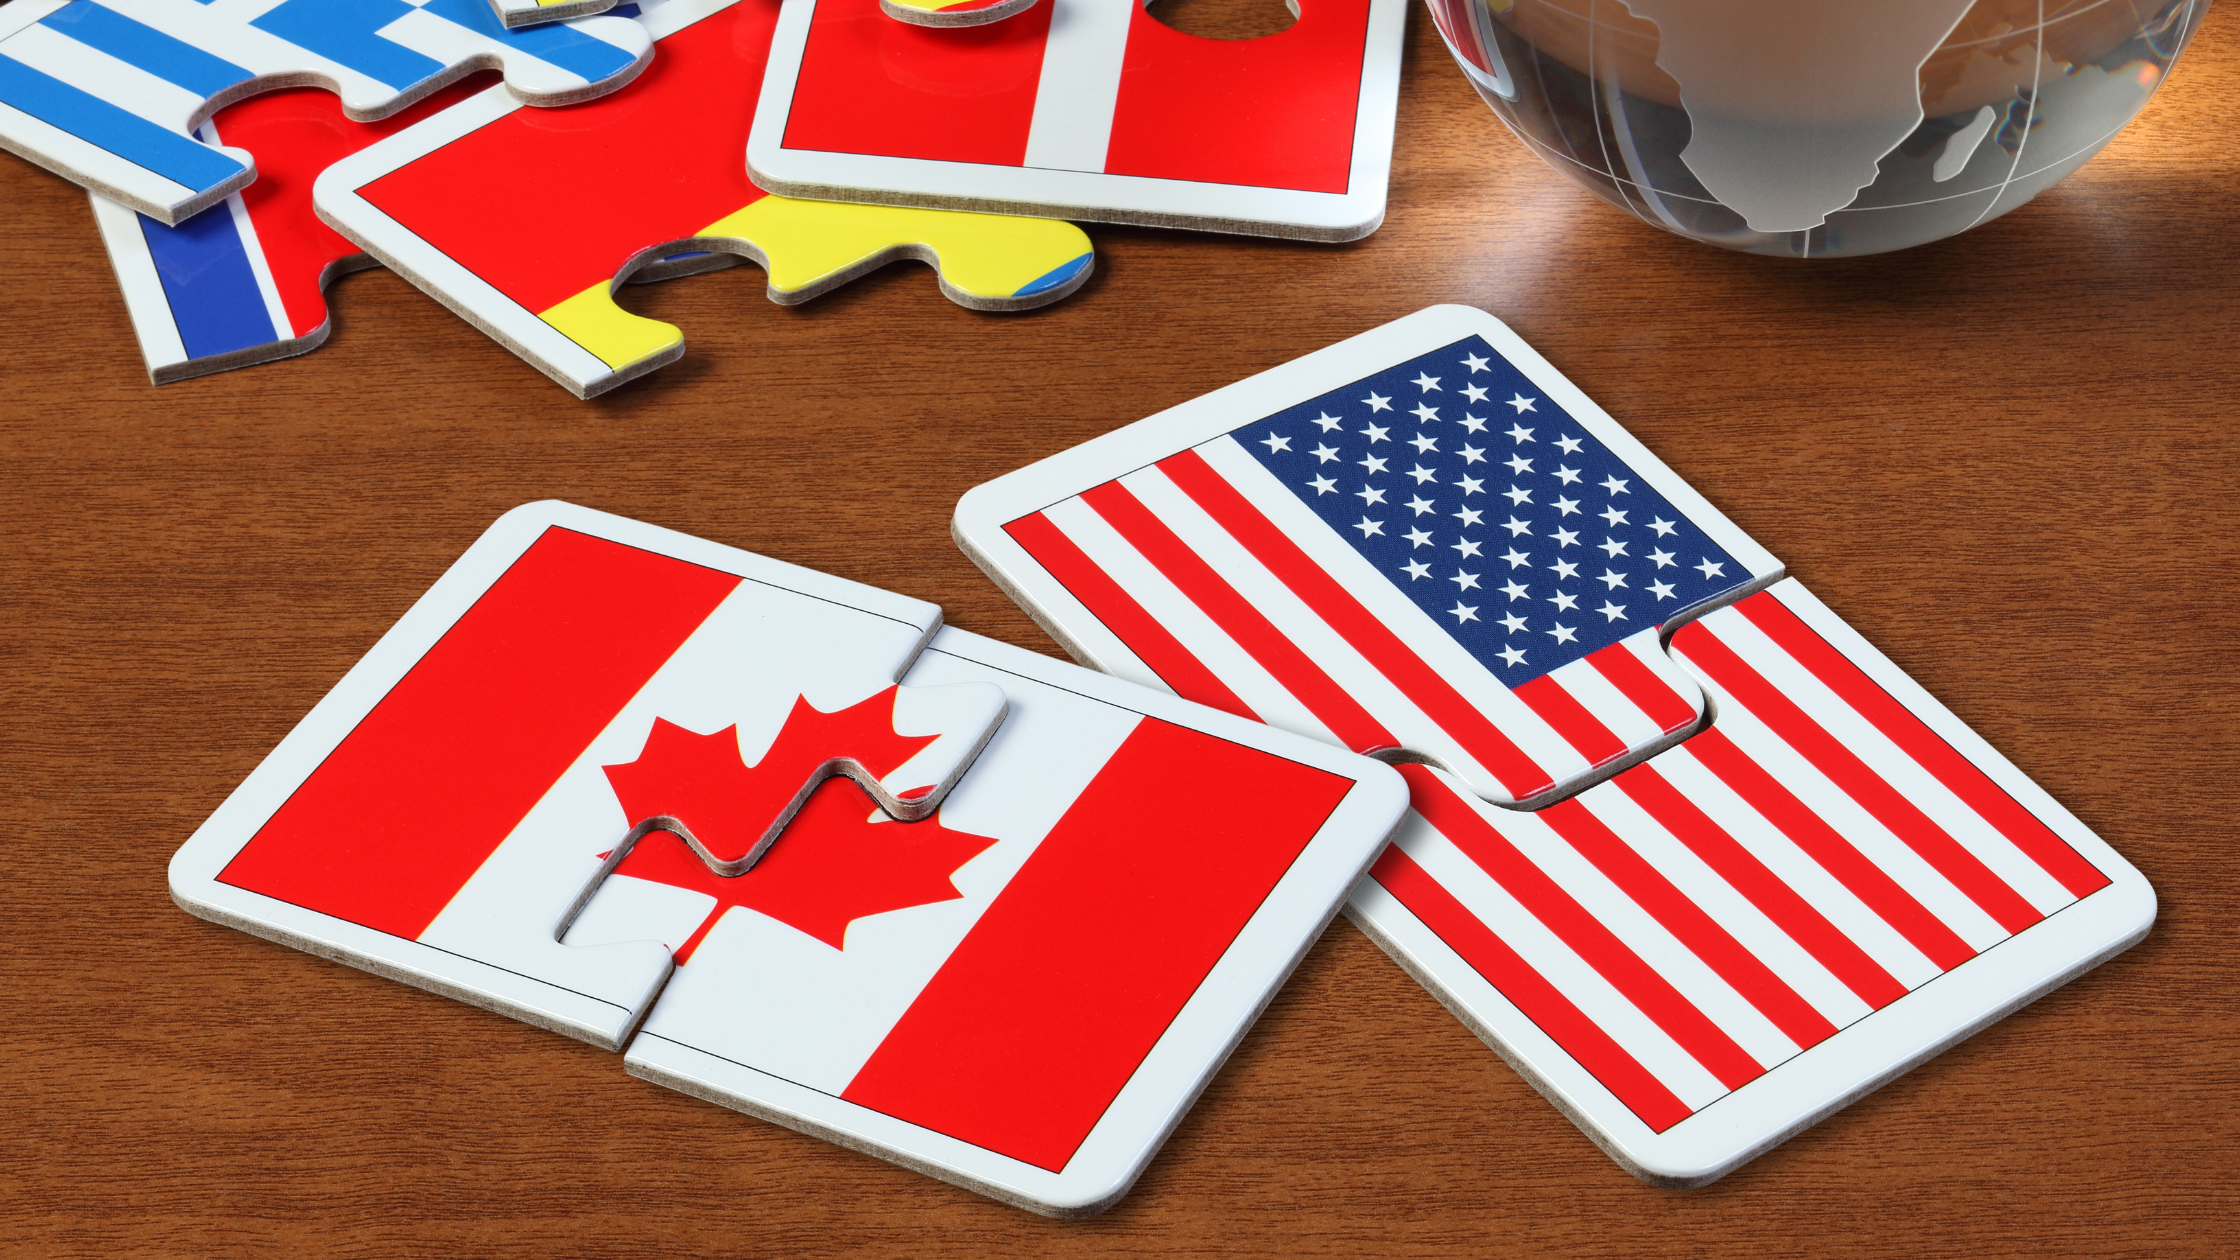 US and Canada flag puzzle pieces